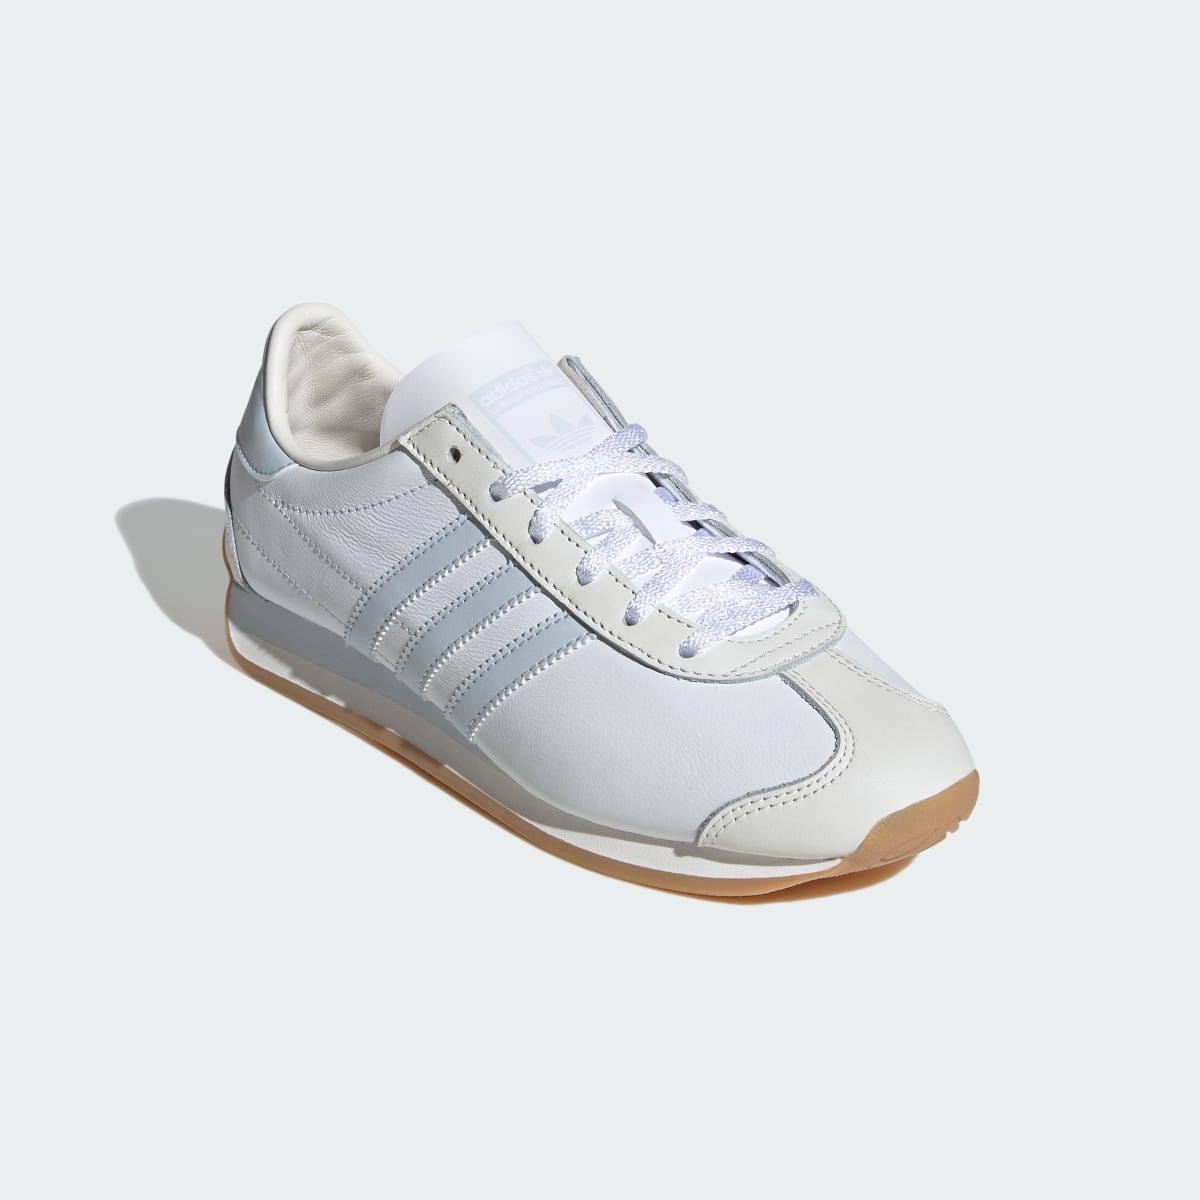 Adidas Country OG Shoes. 5